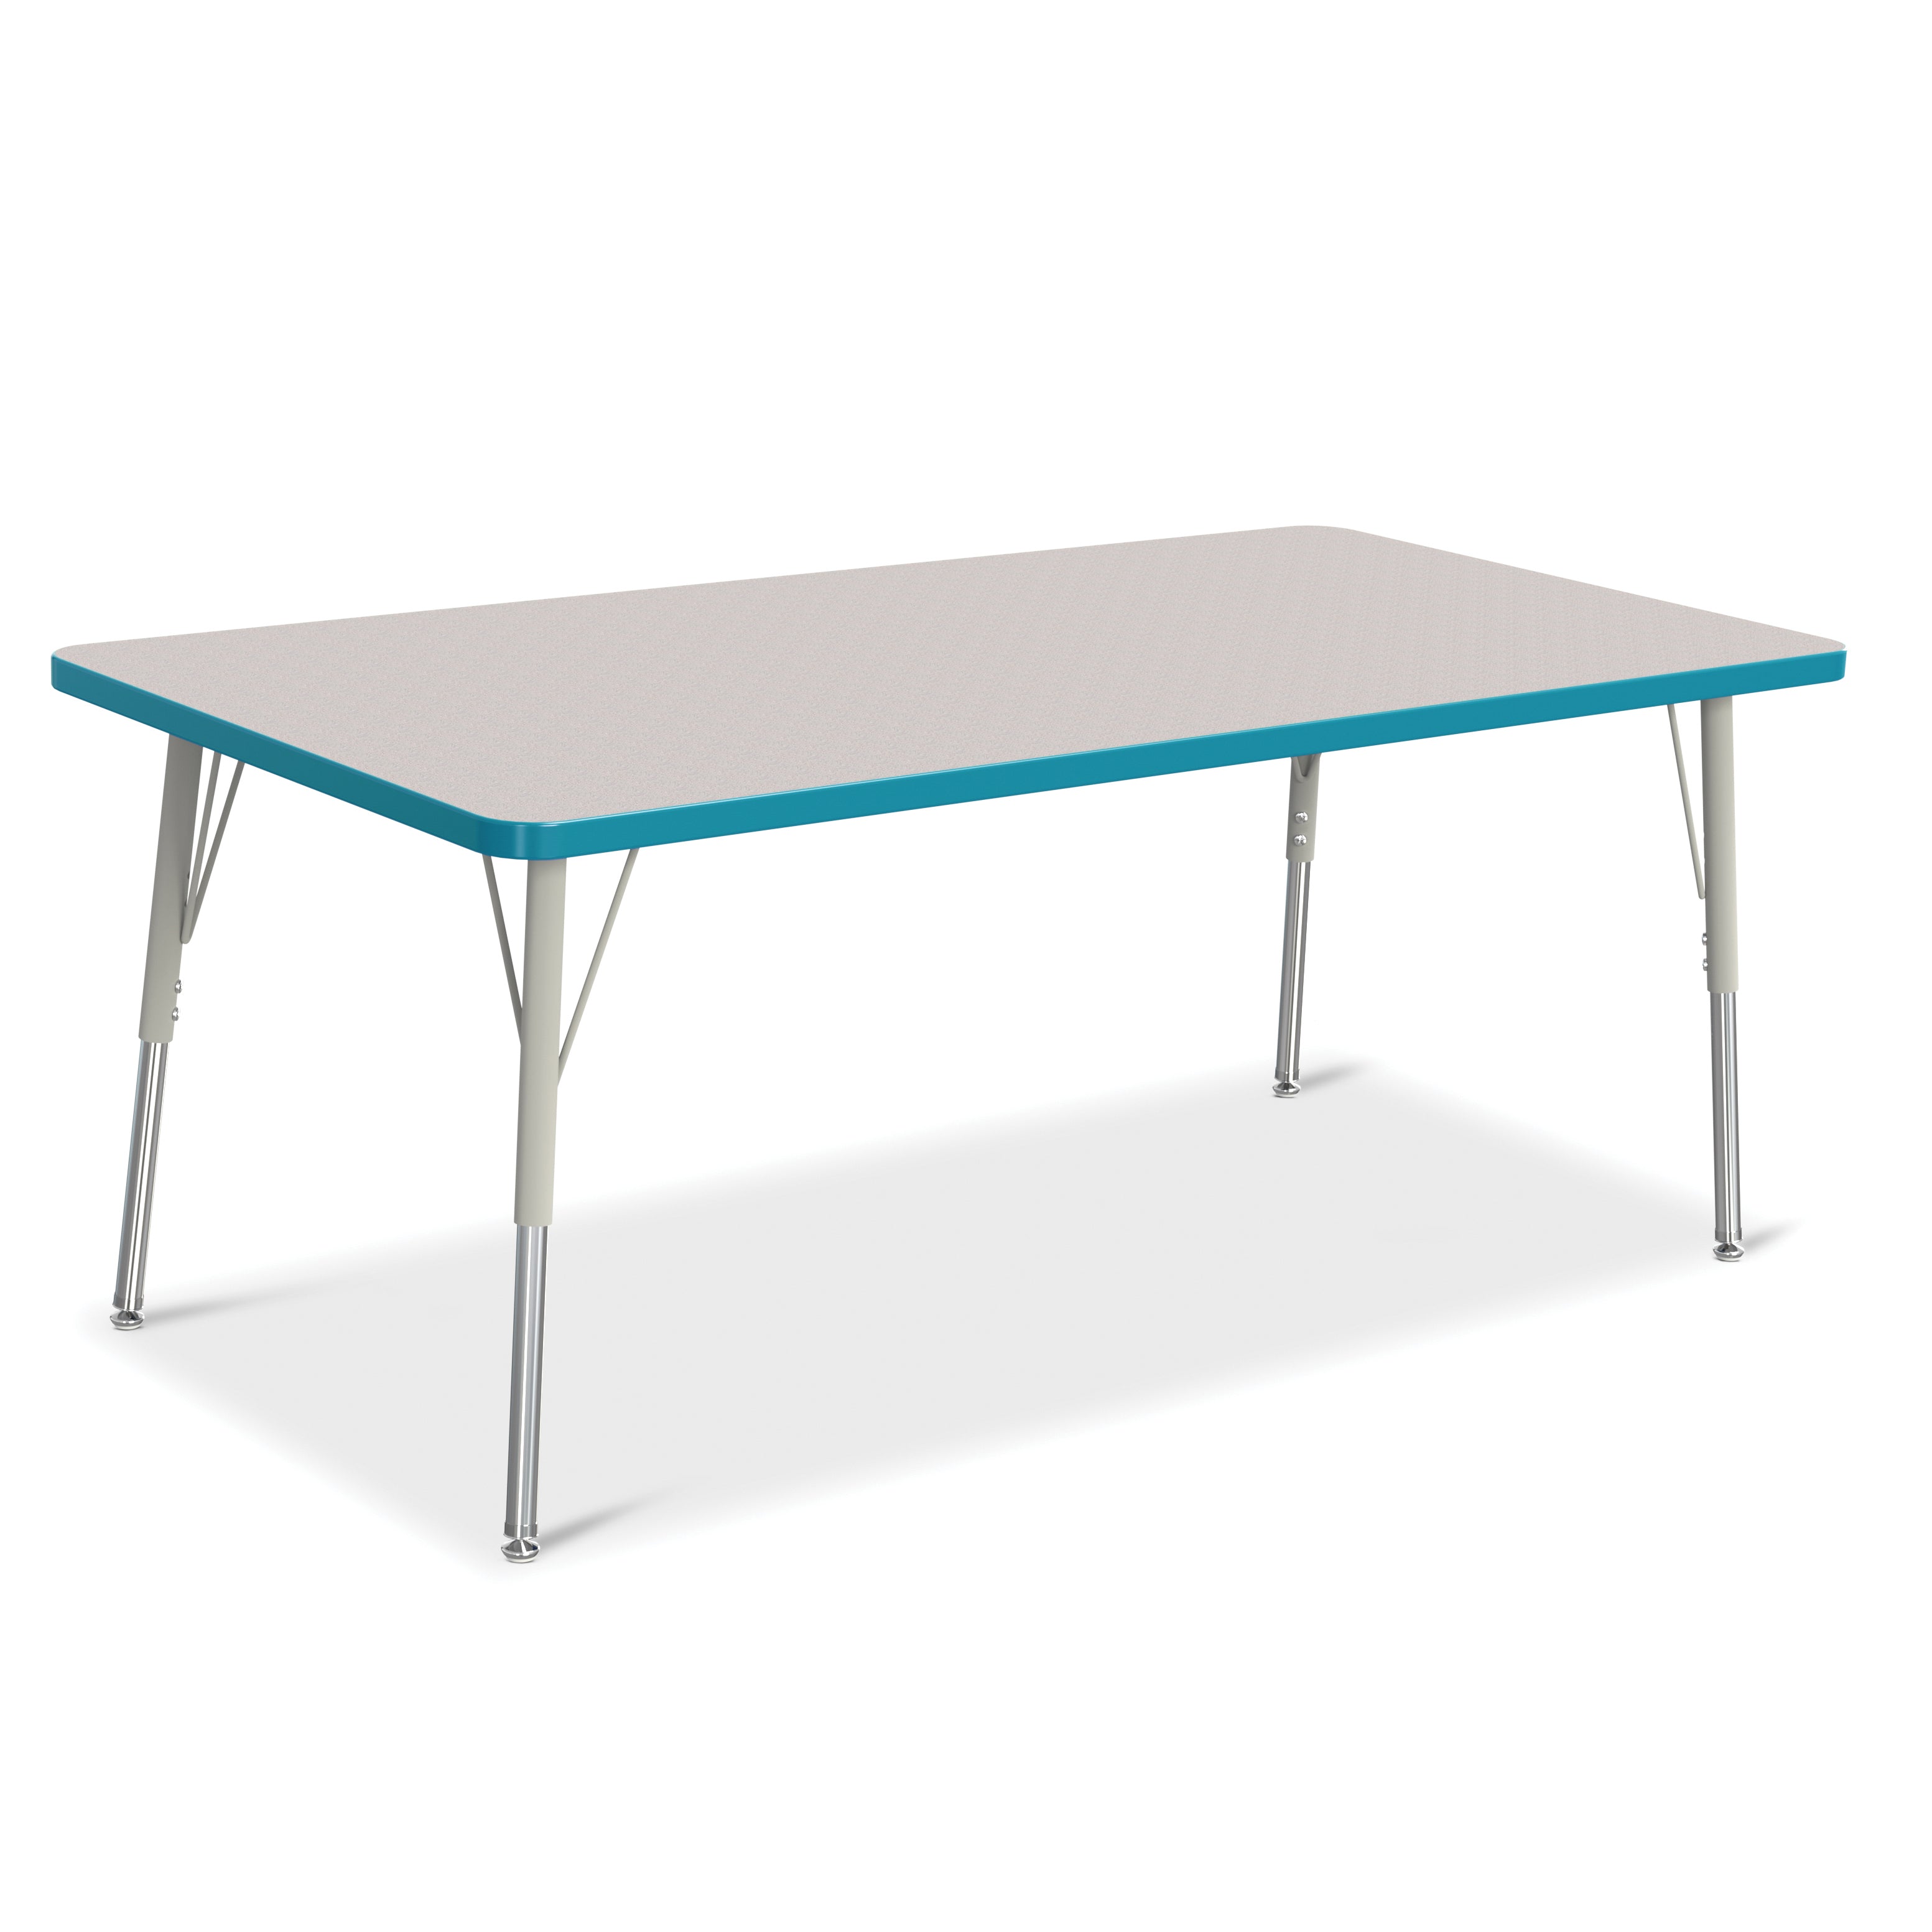 6408JCA005, Berries Rectangle Activity Table - 30" X 60", A-height - Freckled Gray/Teal/Gray